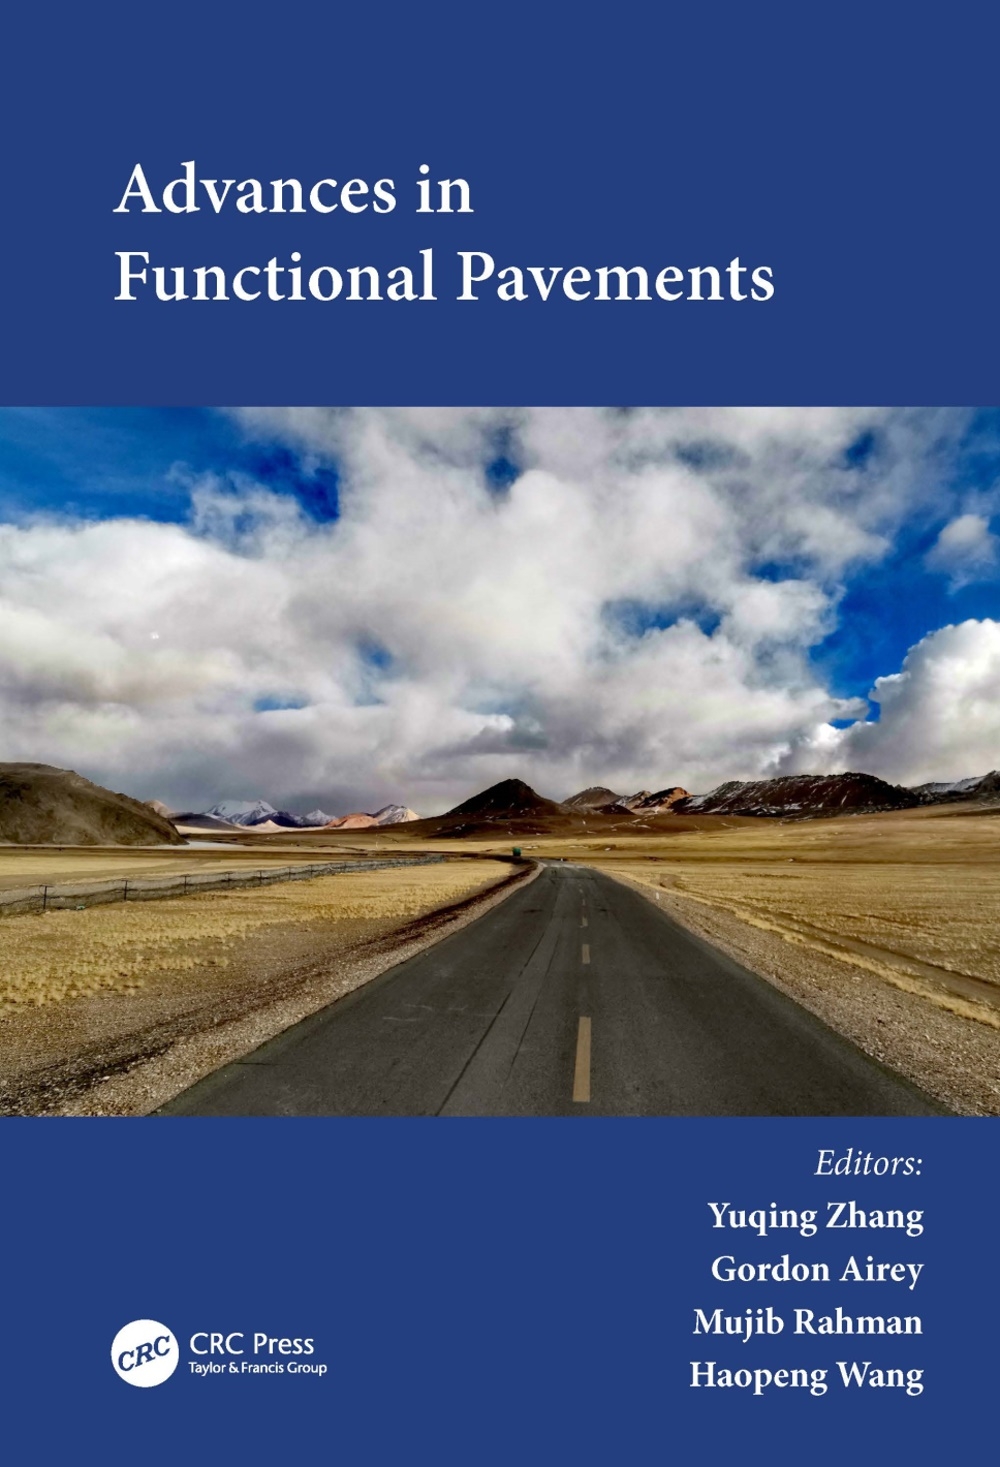 Advances in Functional Pavements: Proceedings of the 7th Chinese-European Workshop on Functional Pavement (Cew 2023), Birmingham, Uk, 2-4 July 2023